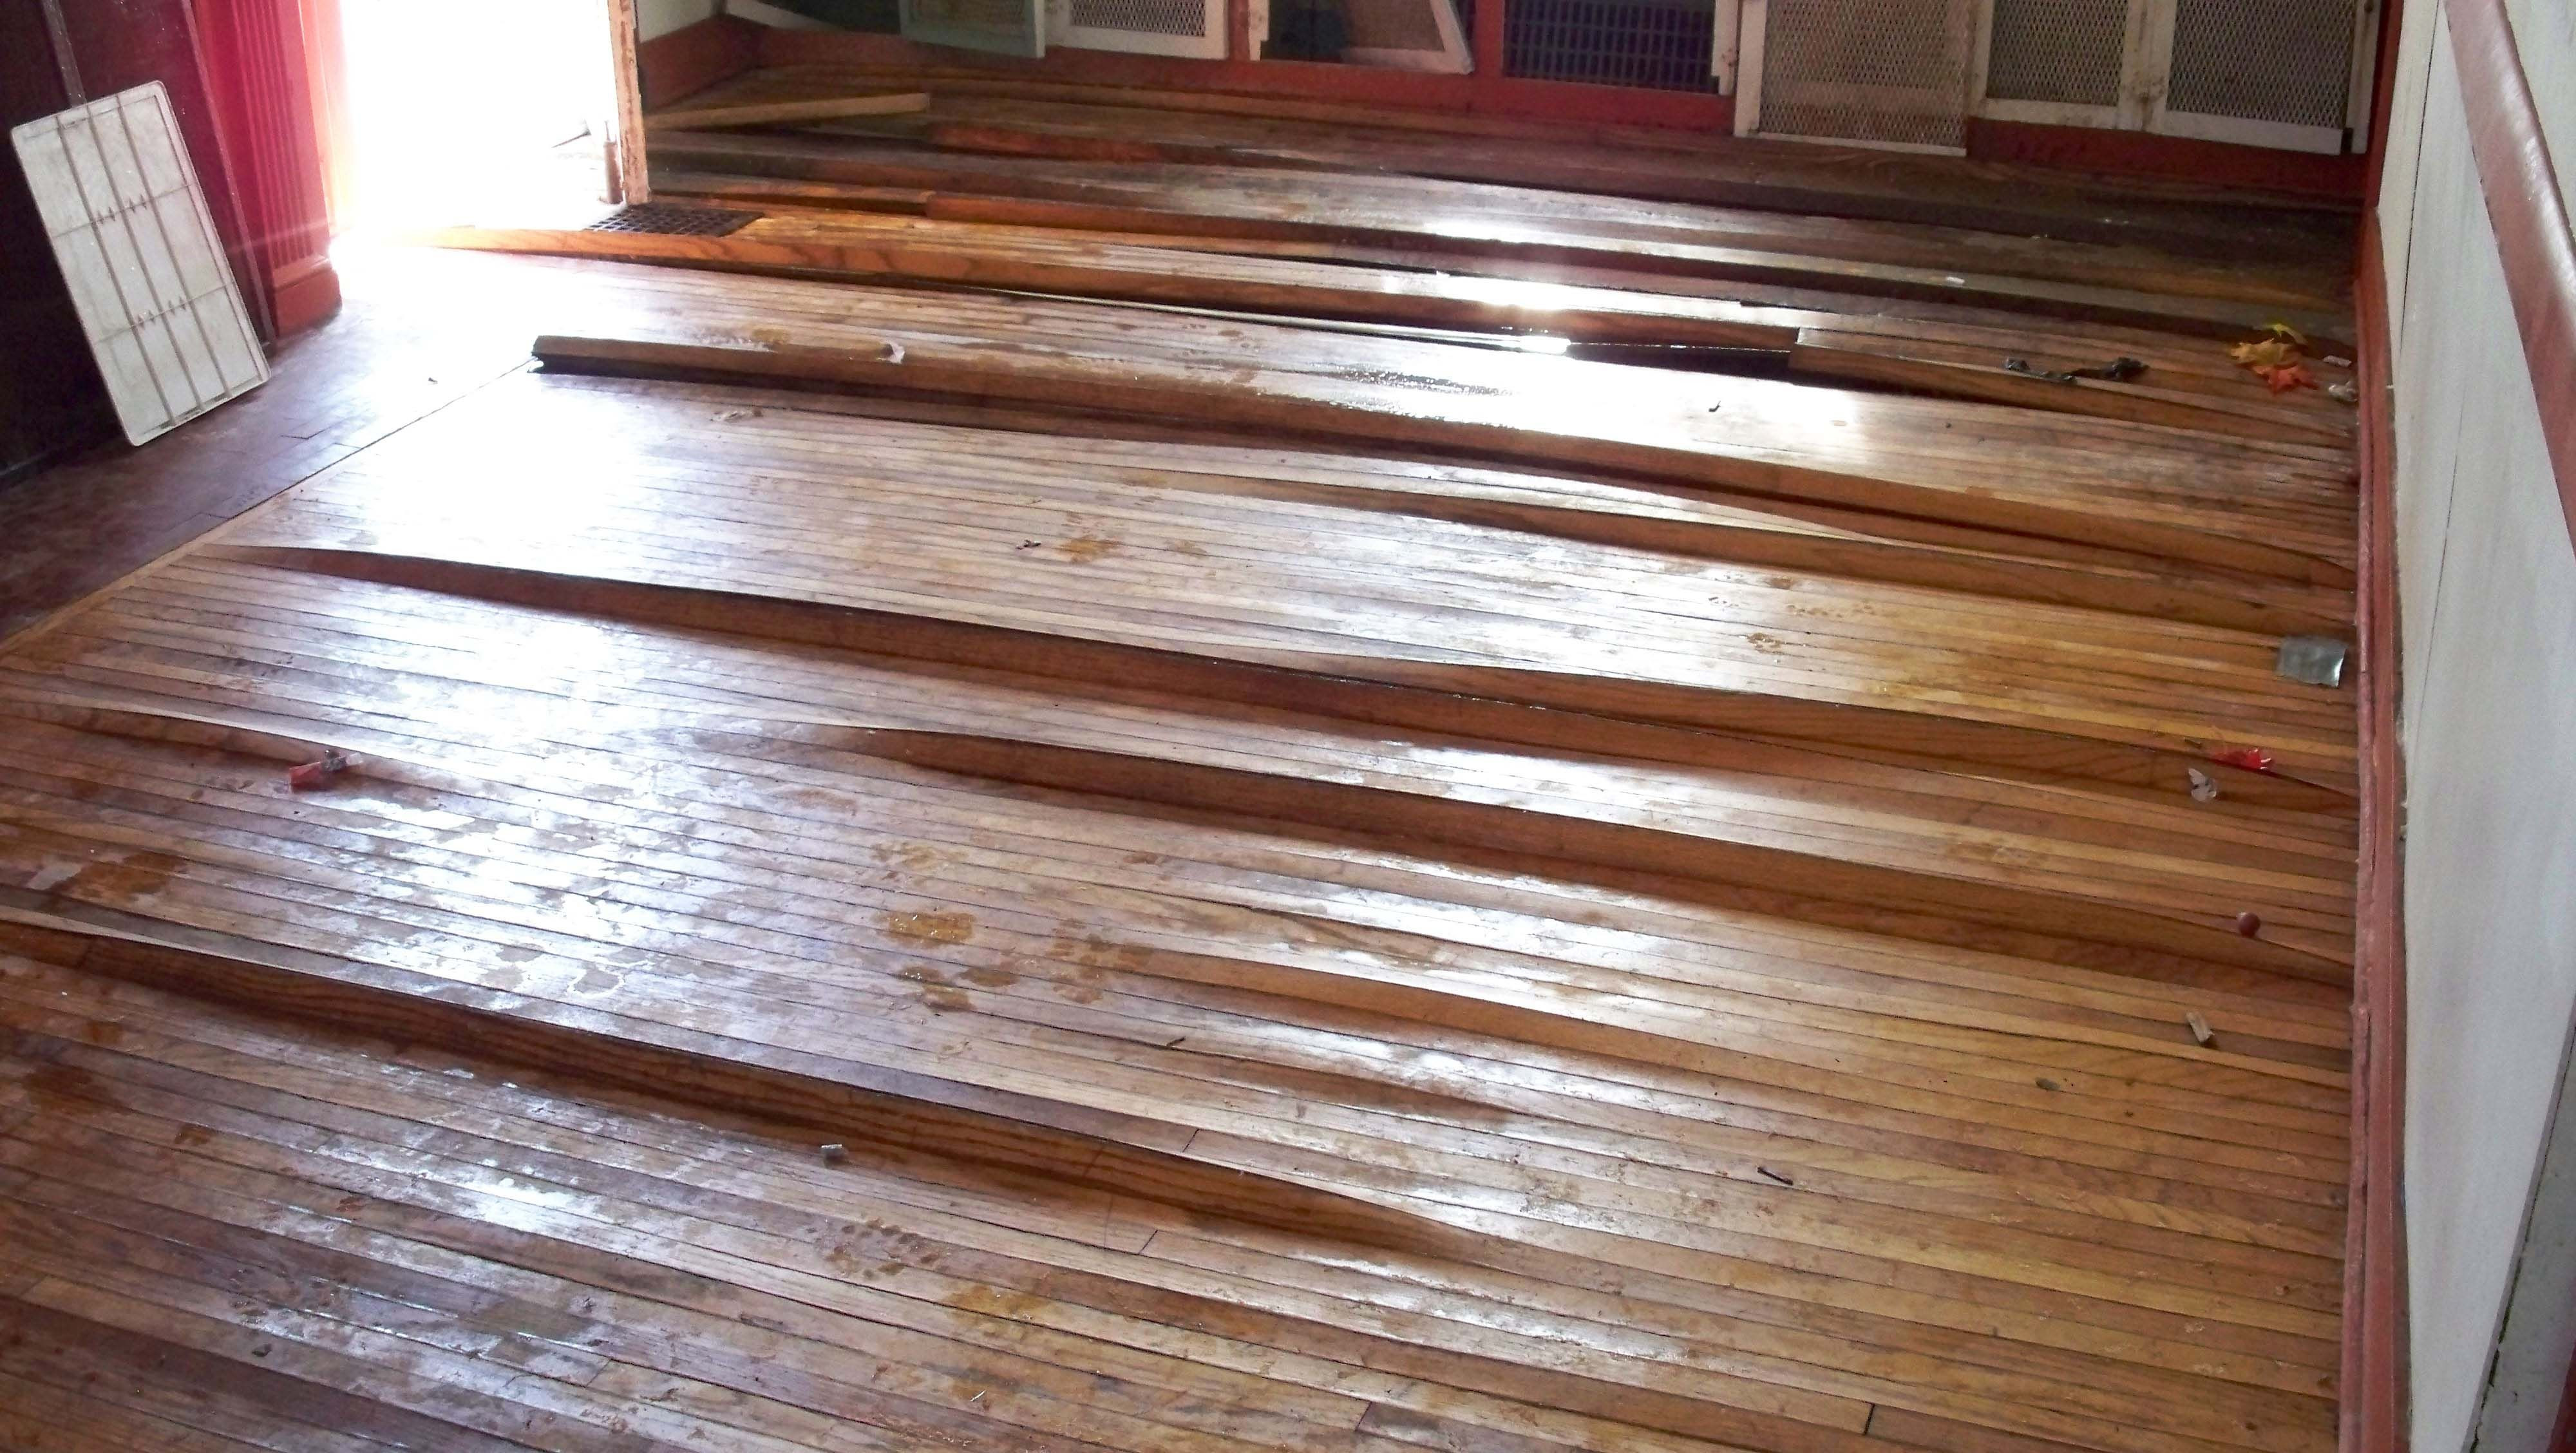 hardwood flooring that will not scratch of hardwood floor water damage warping hardwood floors pinterest within hardwood floor water damage warping